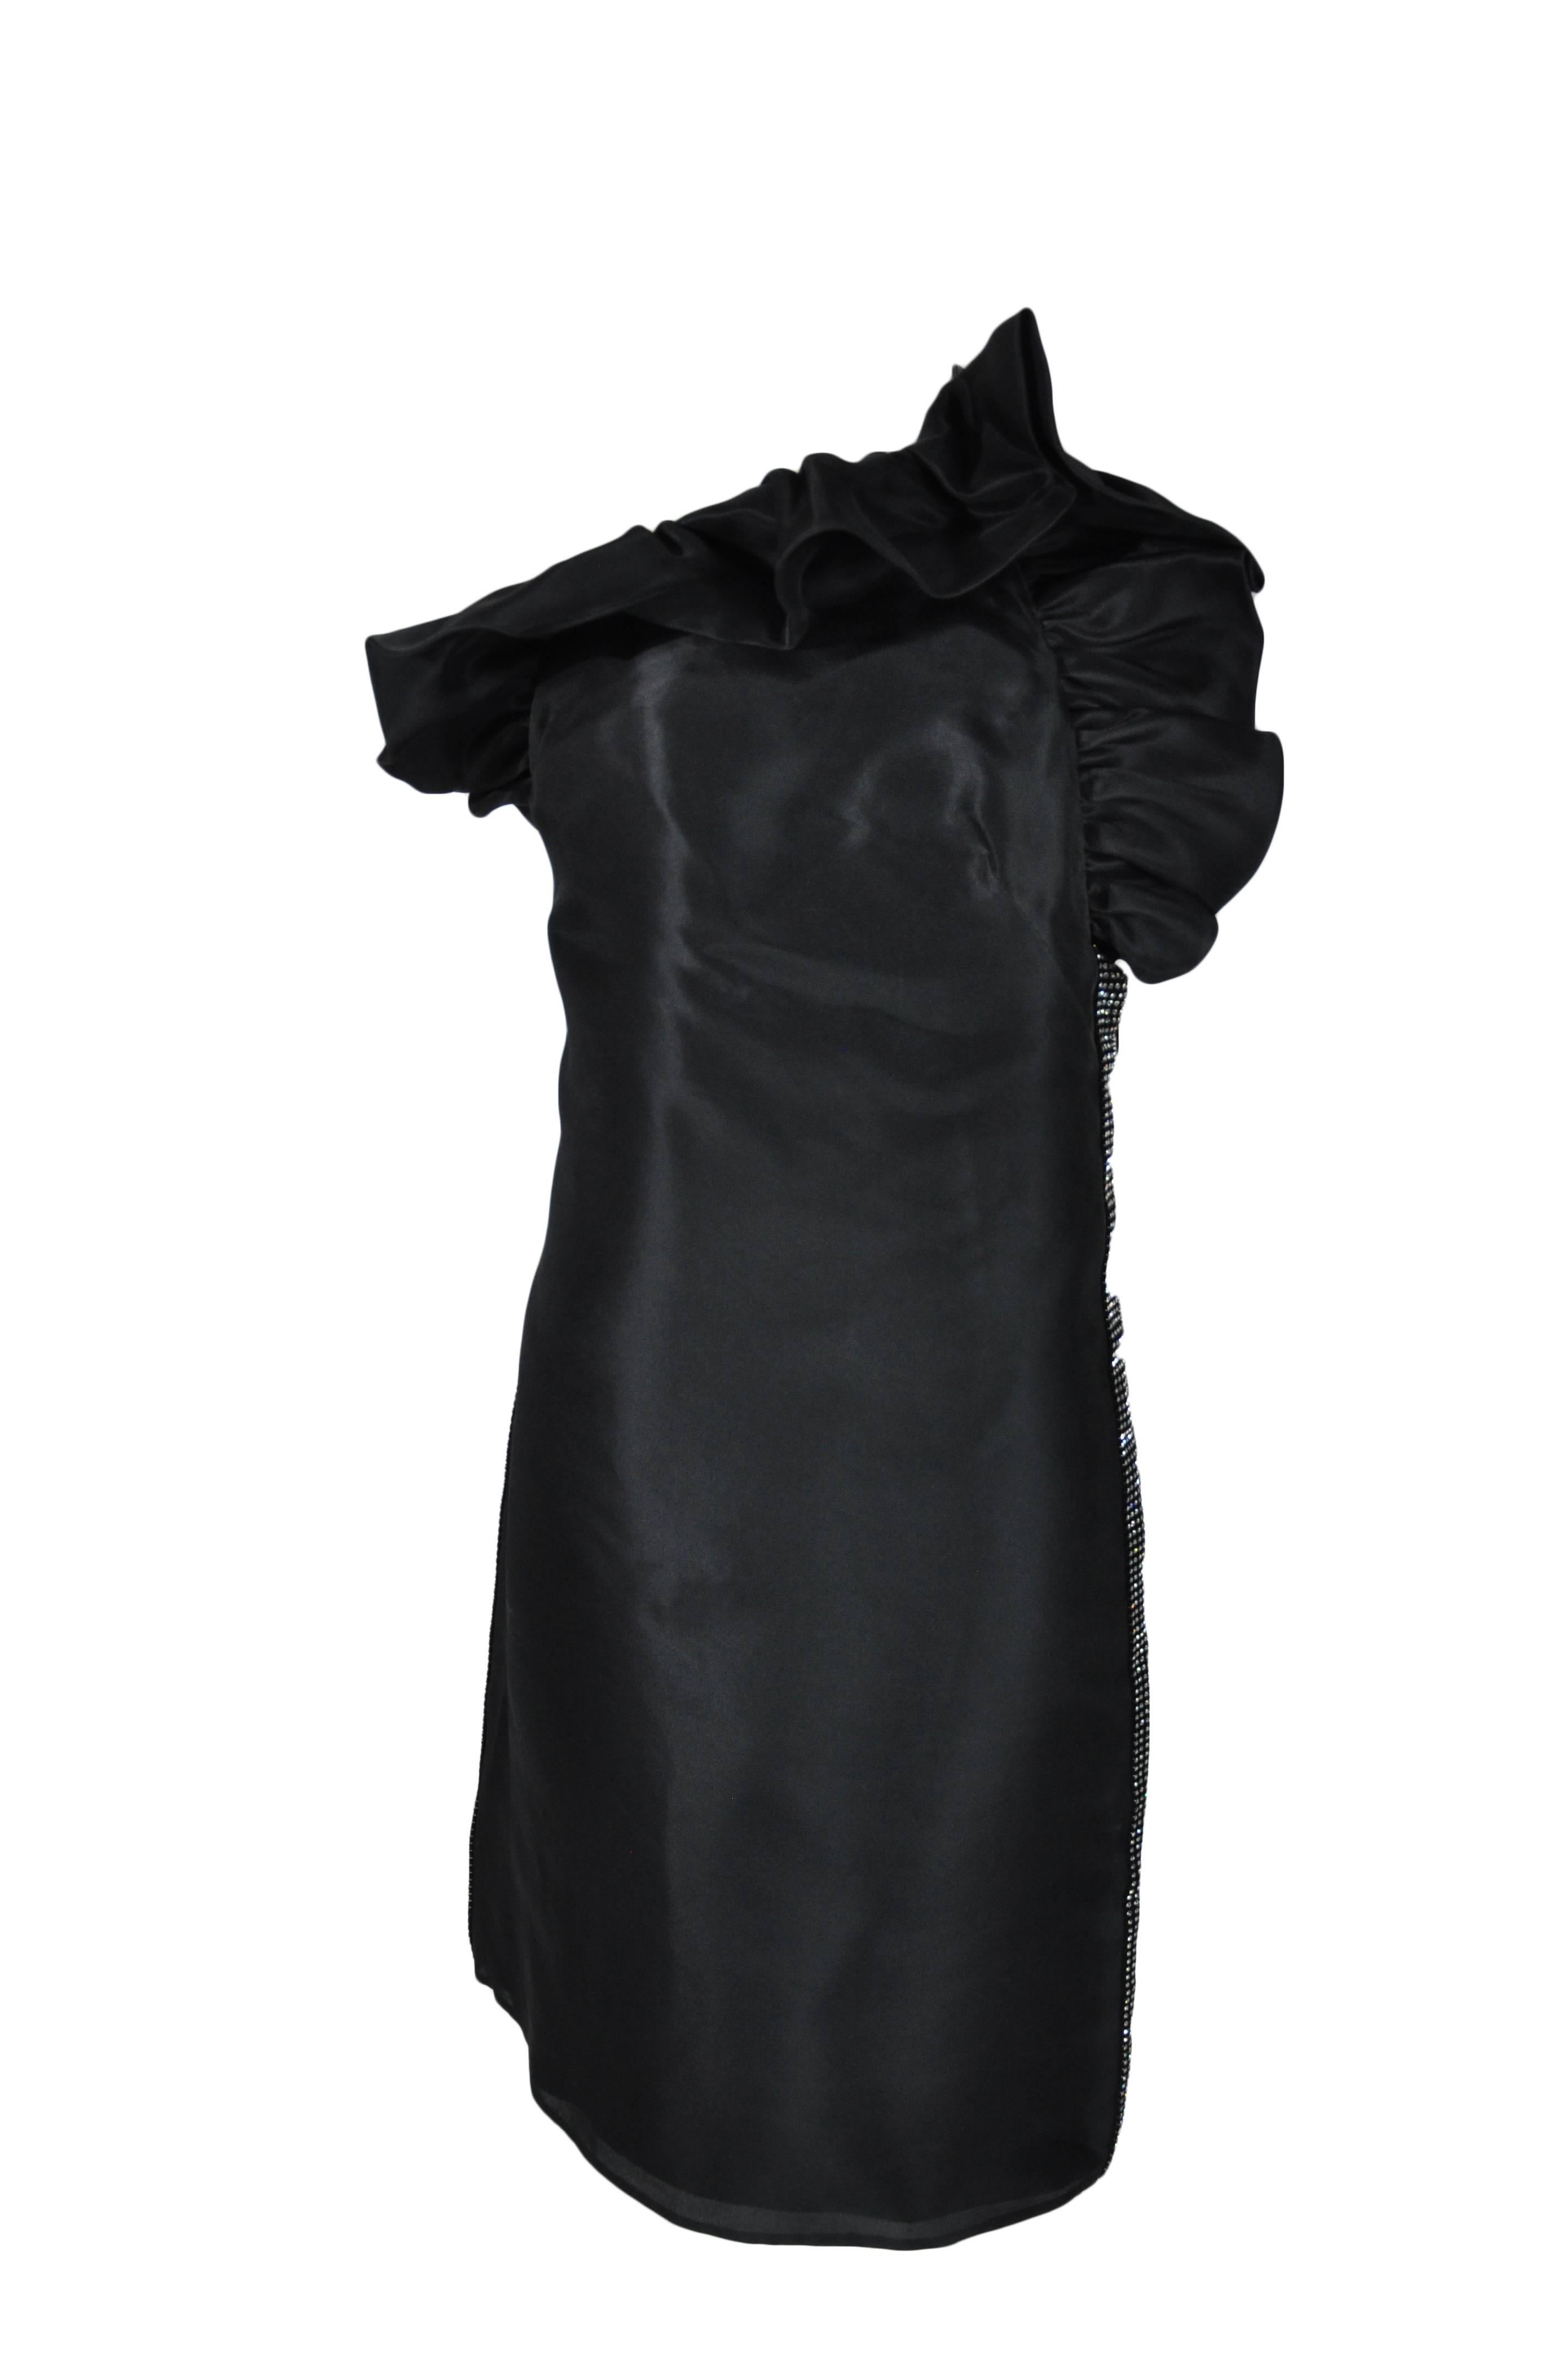 This ruffled neckline low back mini dress is made of organza with a leather strap across the back to hold the dress in shape. Beautifully adorned with crystals on sides.  Zip fastening at side. Fully lined.